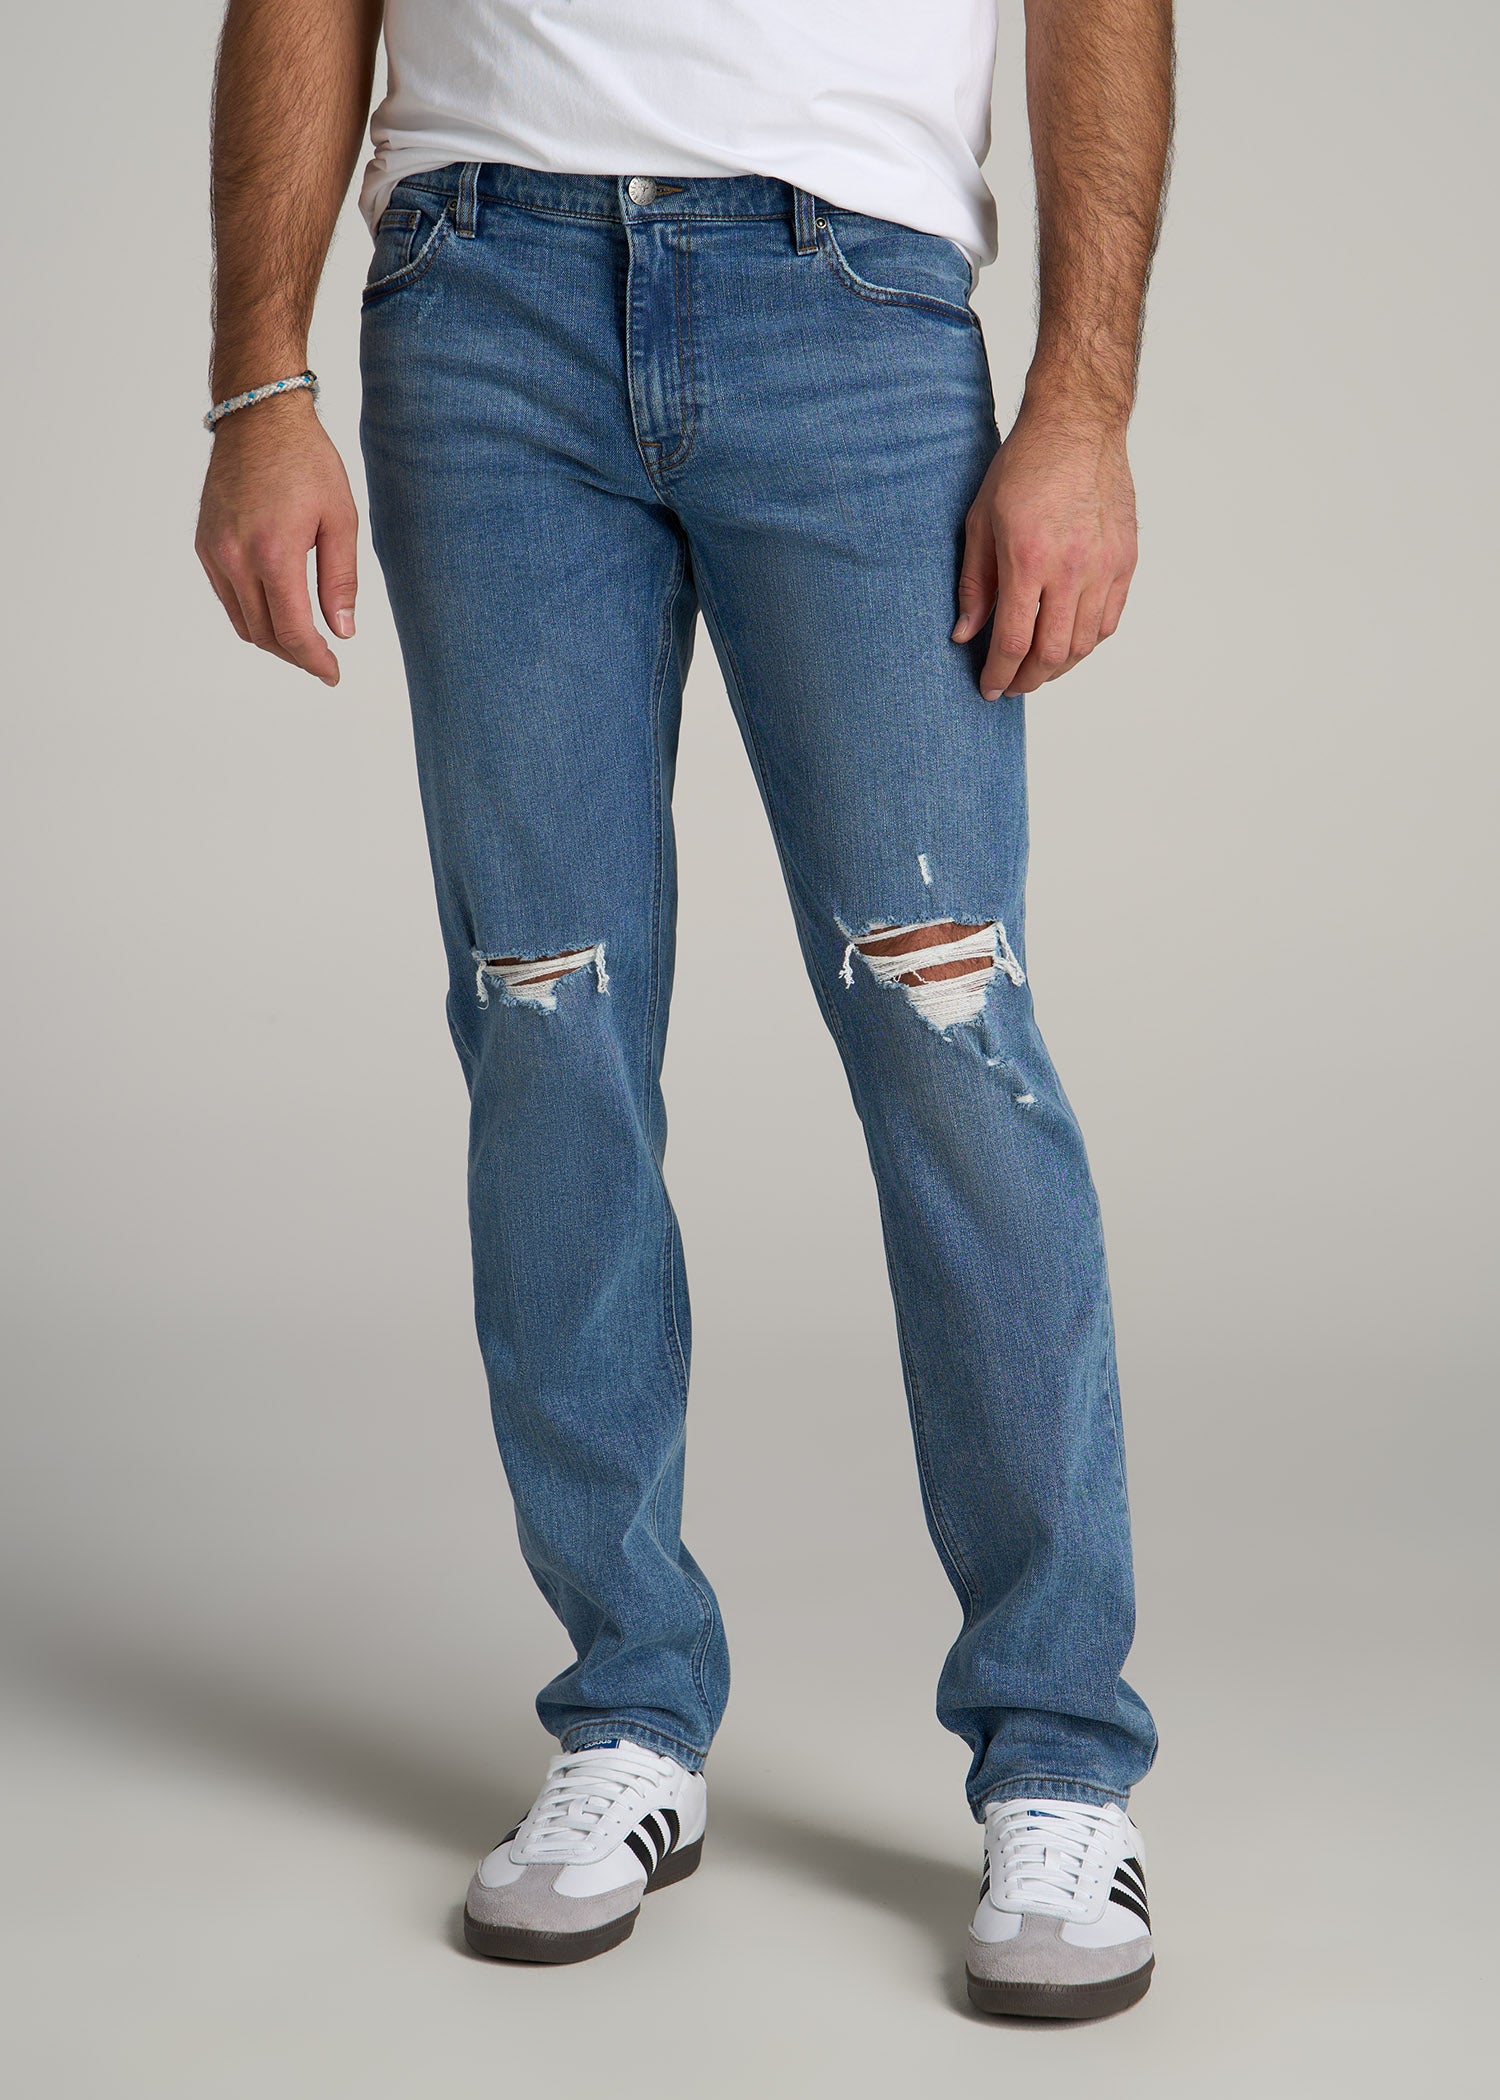 Carman Jeans and Pants for Tall Men